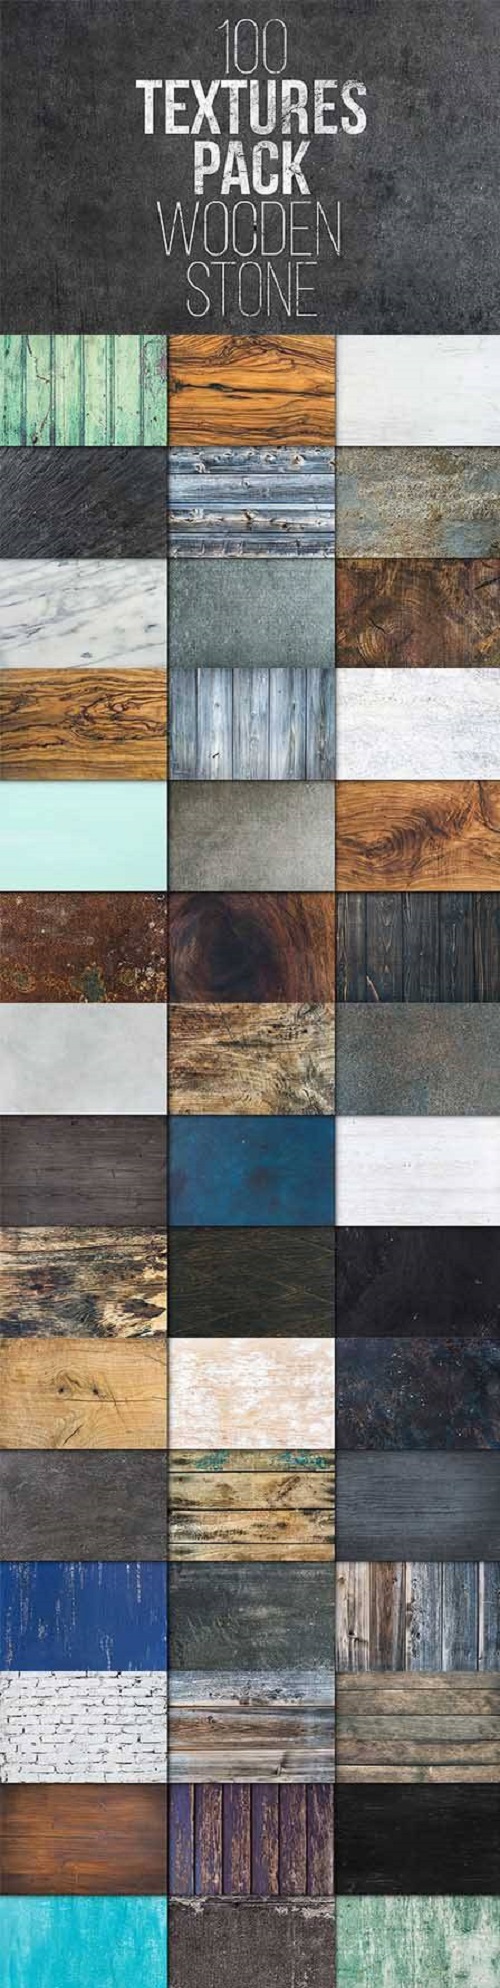 100 Textures Pack. Wooden & Stone 1723951